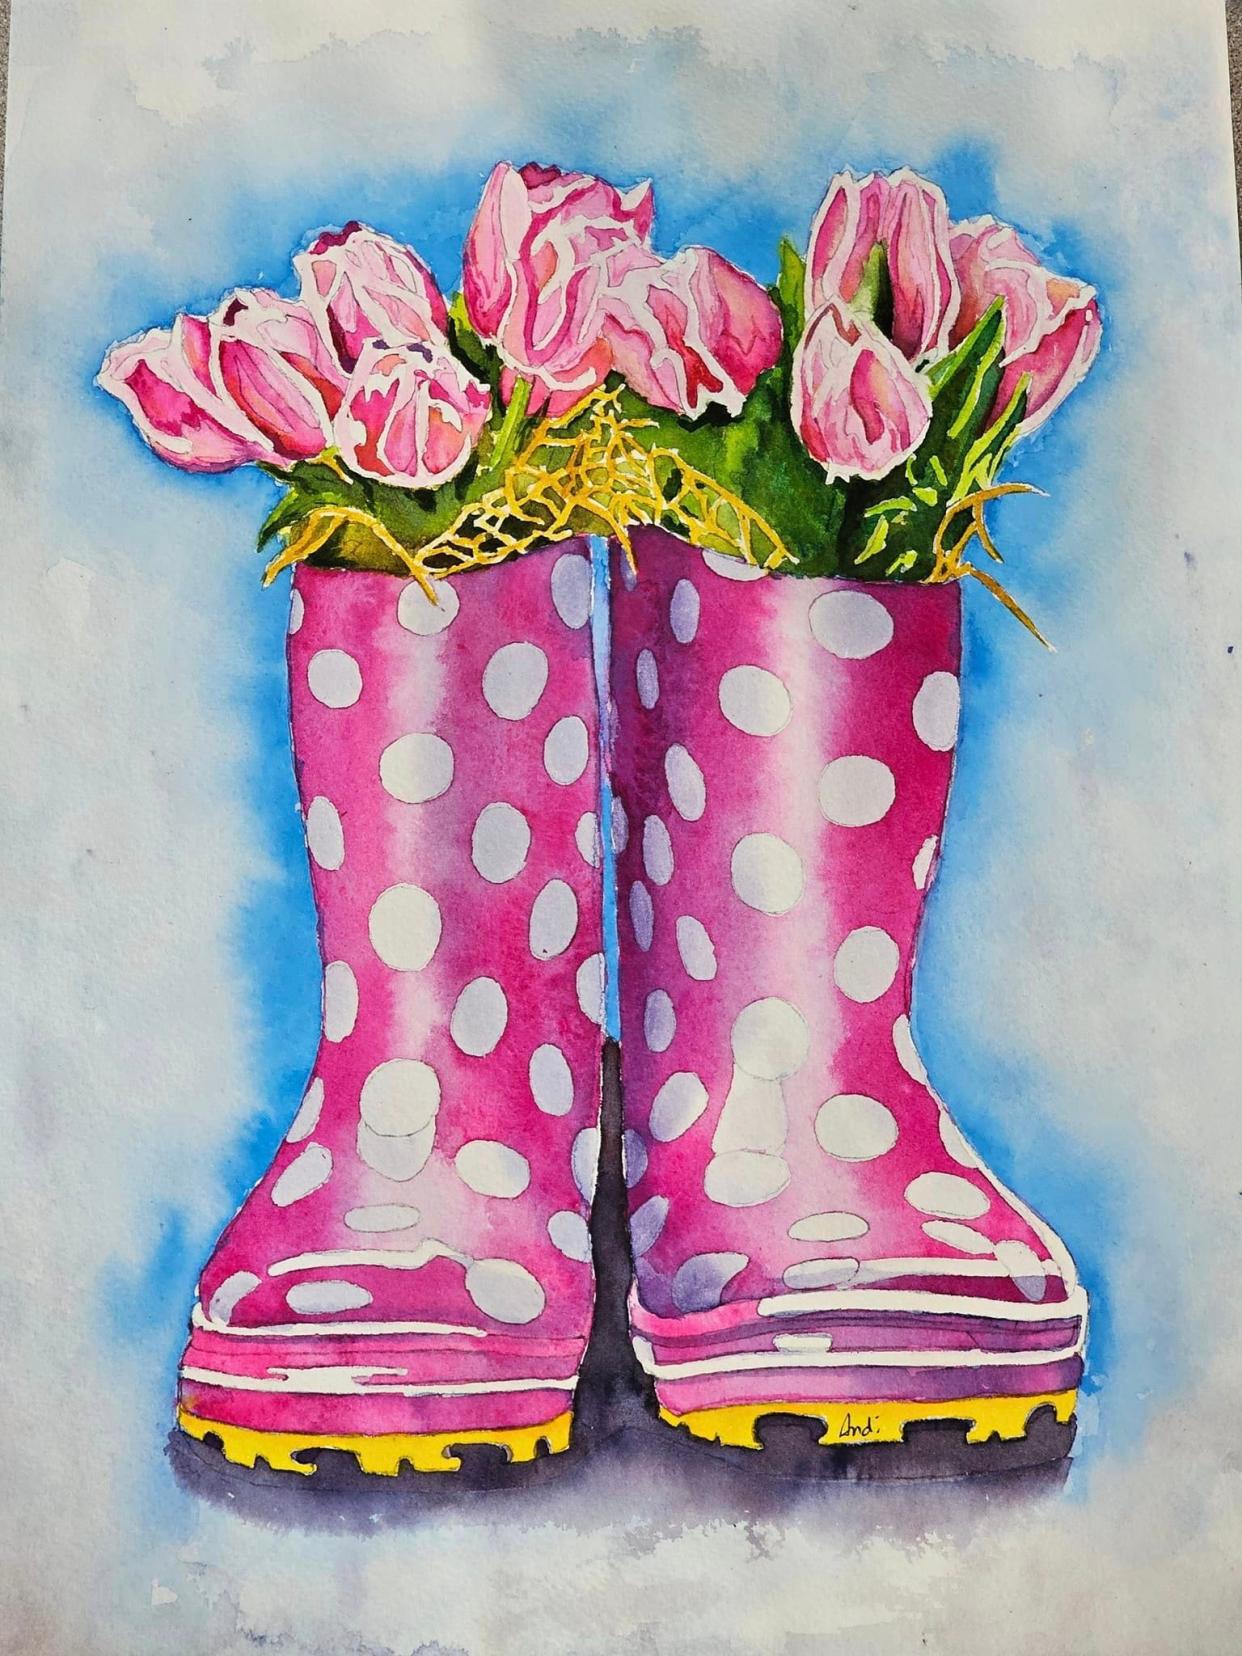 An exhibit by artist Andi Rogers, of Berlin, will be on display through June 30 at Thrasher Opera House in Green Lake.